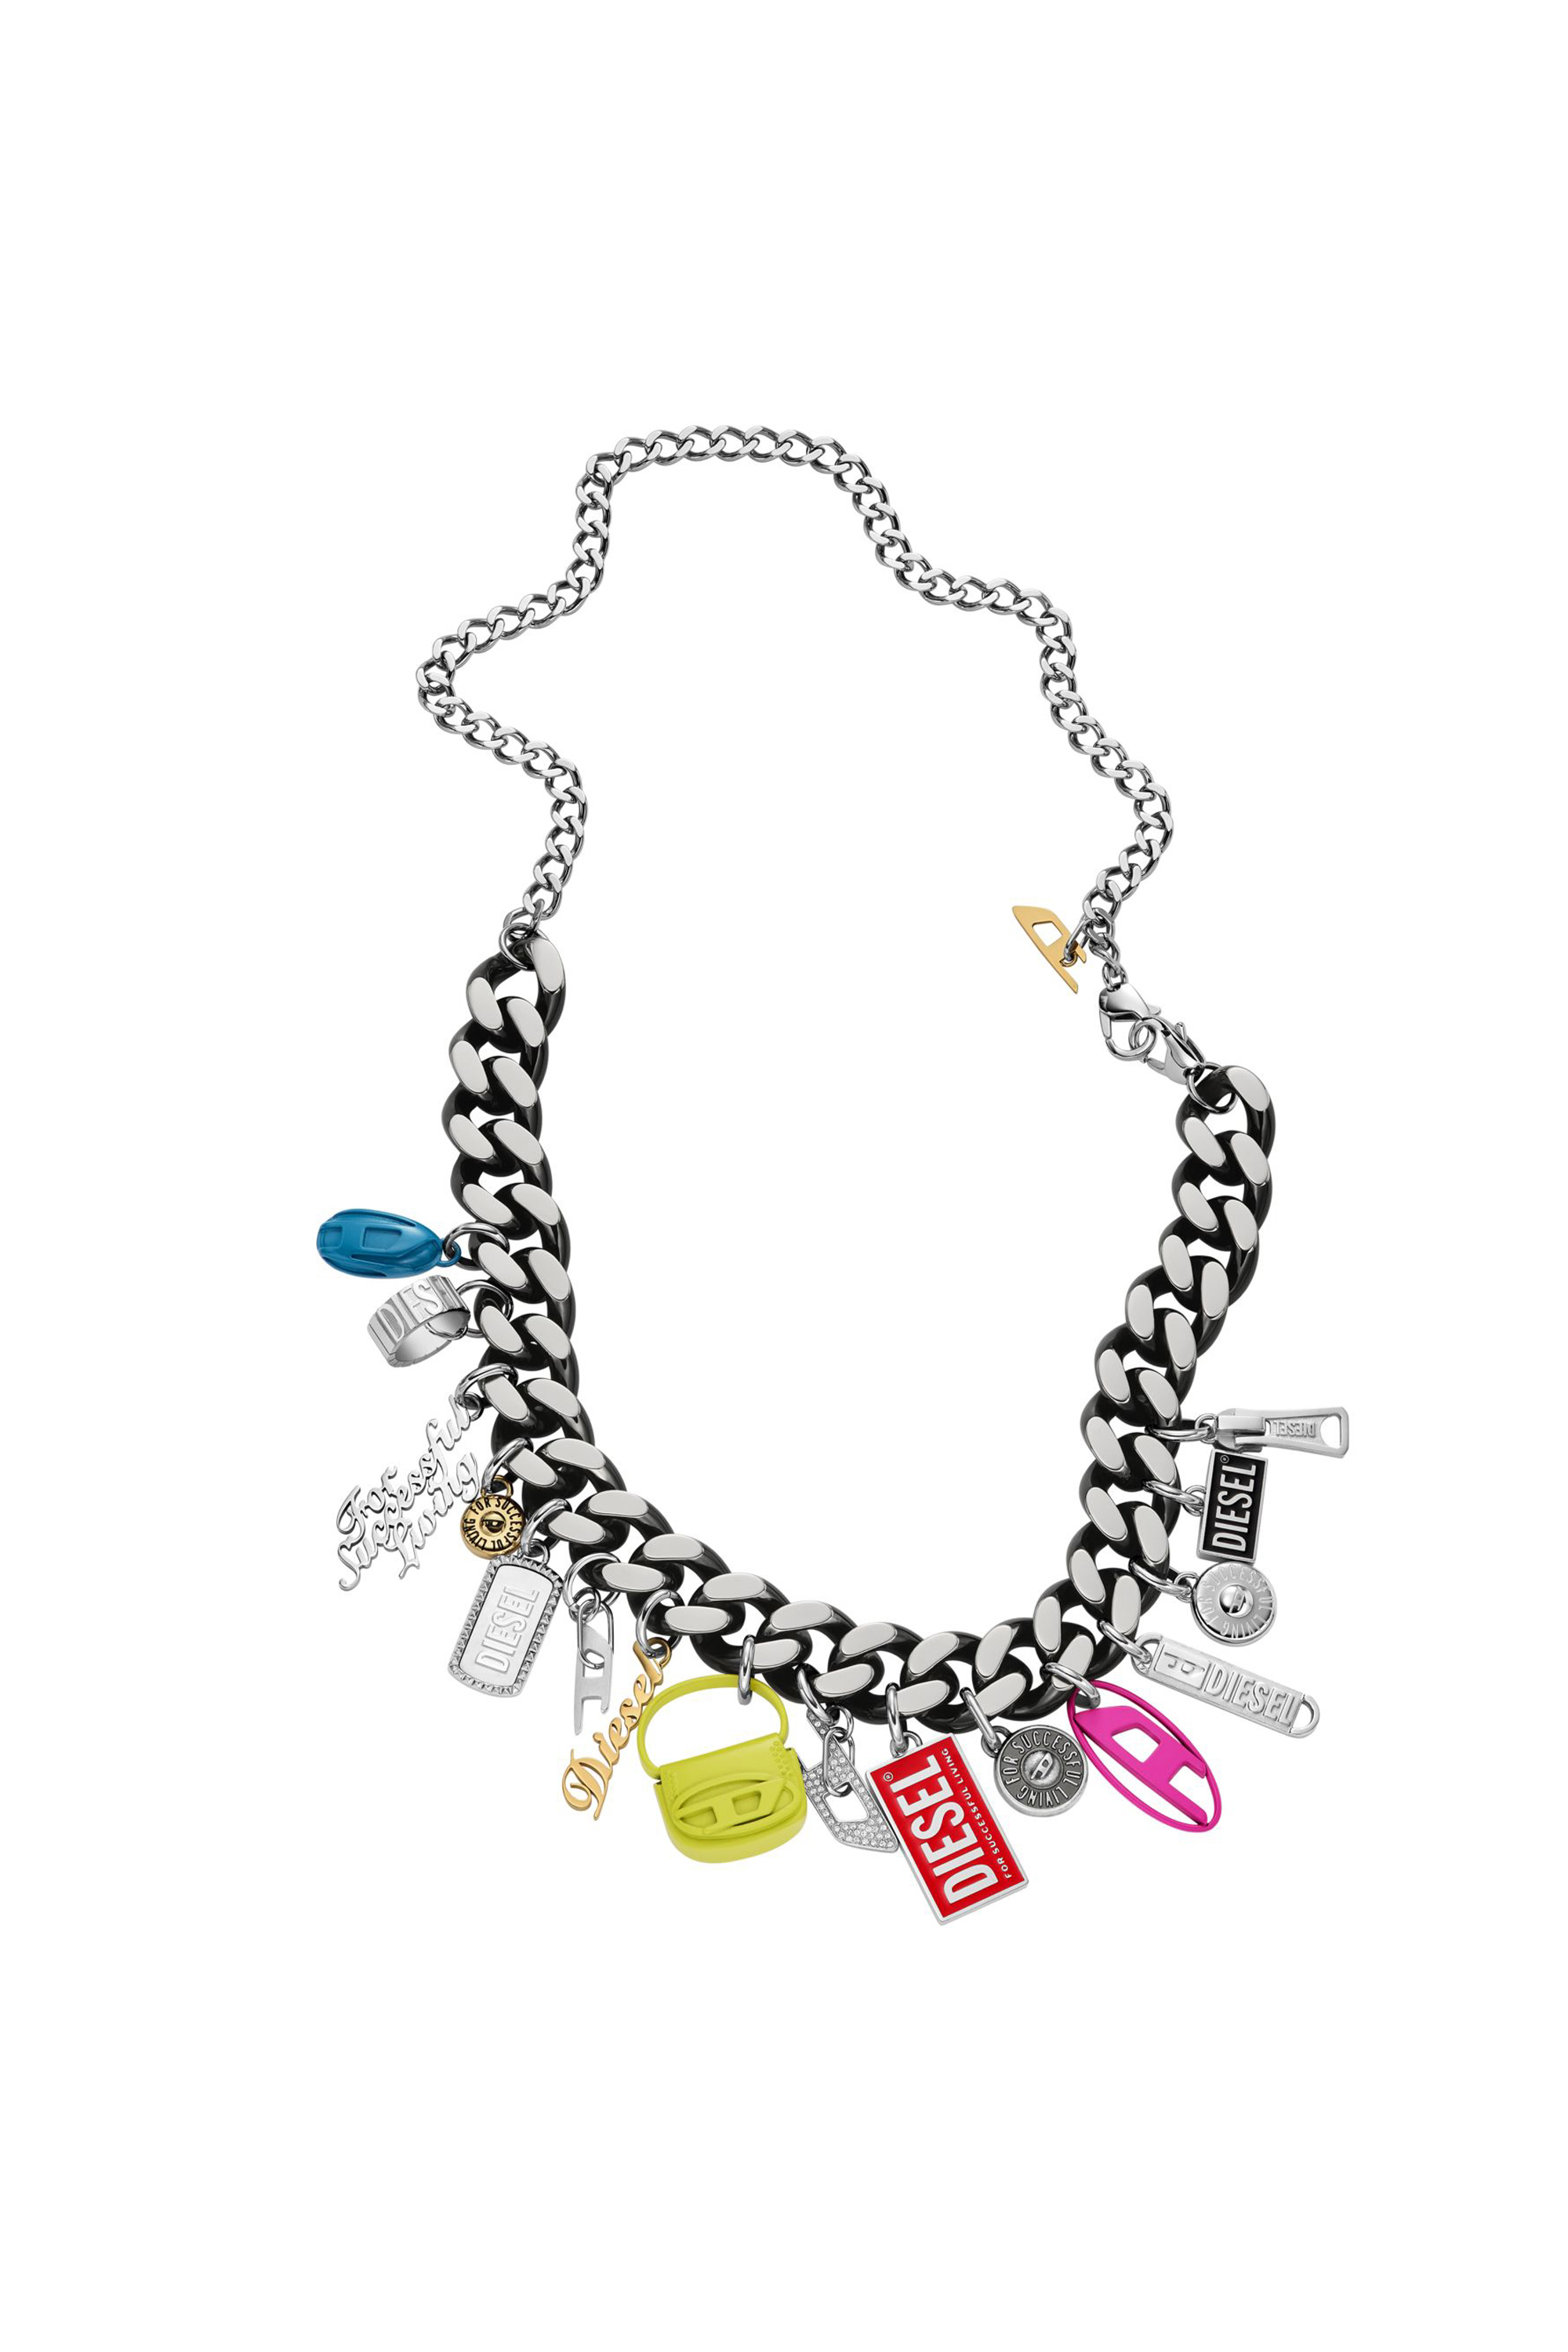 Diesel - DX1522 JEWEL, Unisex Black stainless steel charm chain necklace in マルチカラー - Image 2